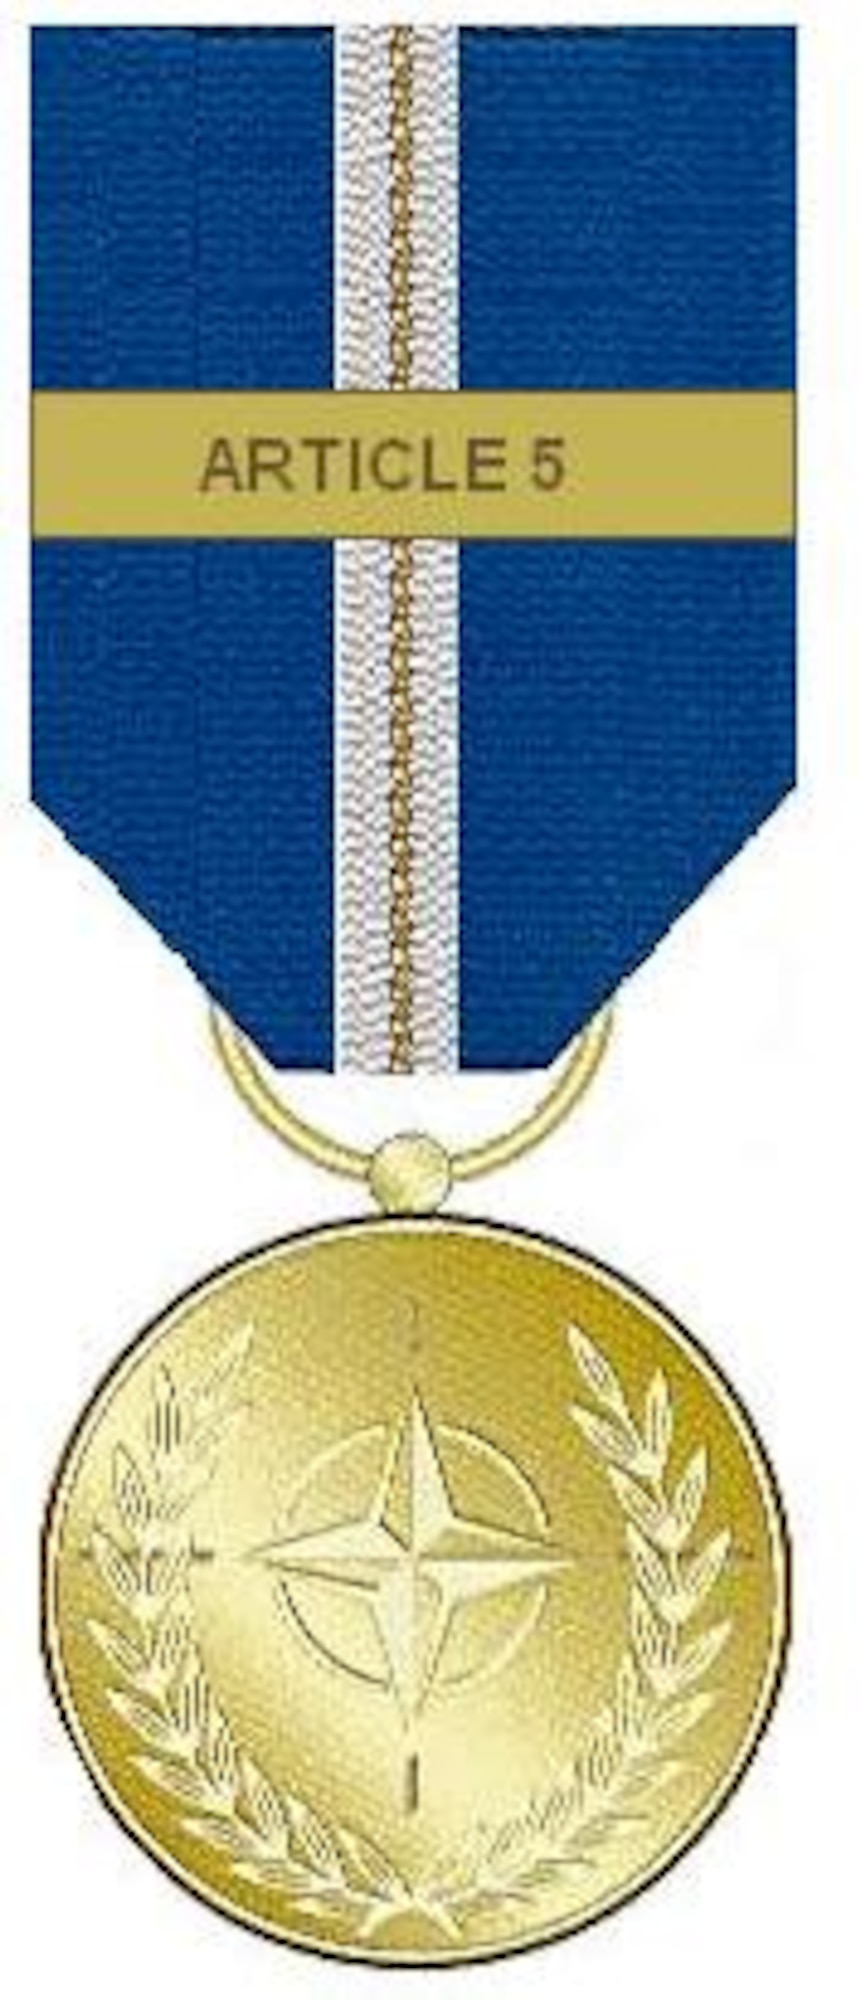 The Article 5 NATO Medal (Operation Eagle Assist)